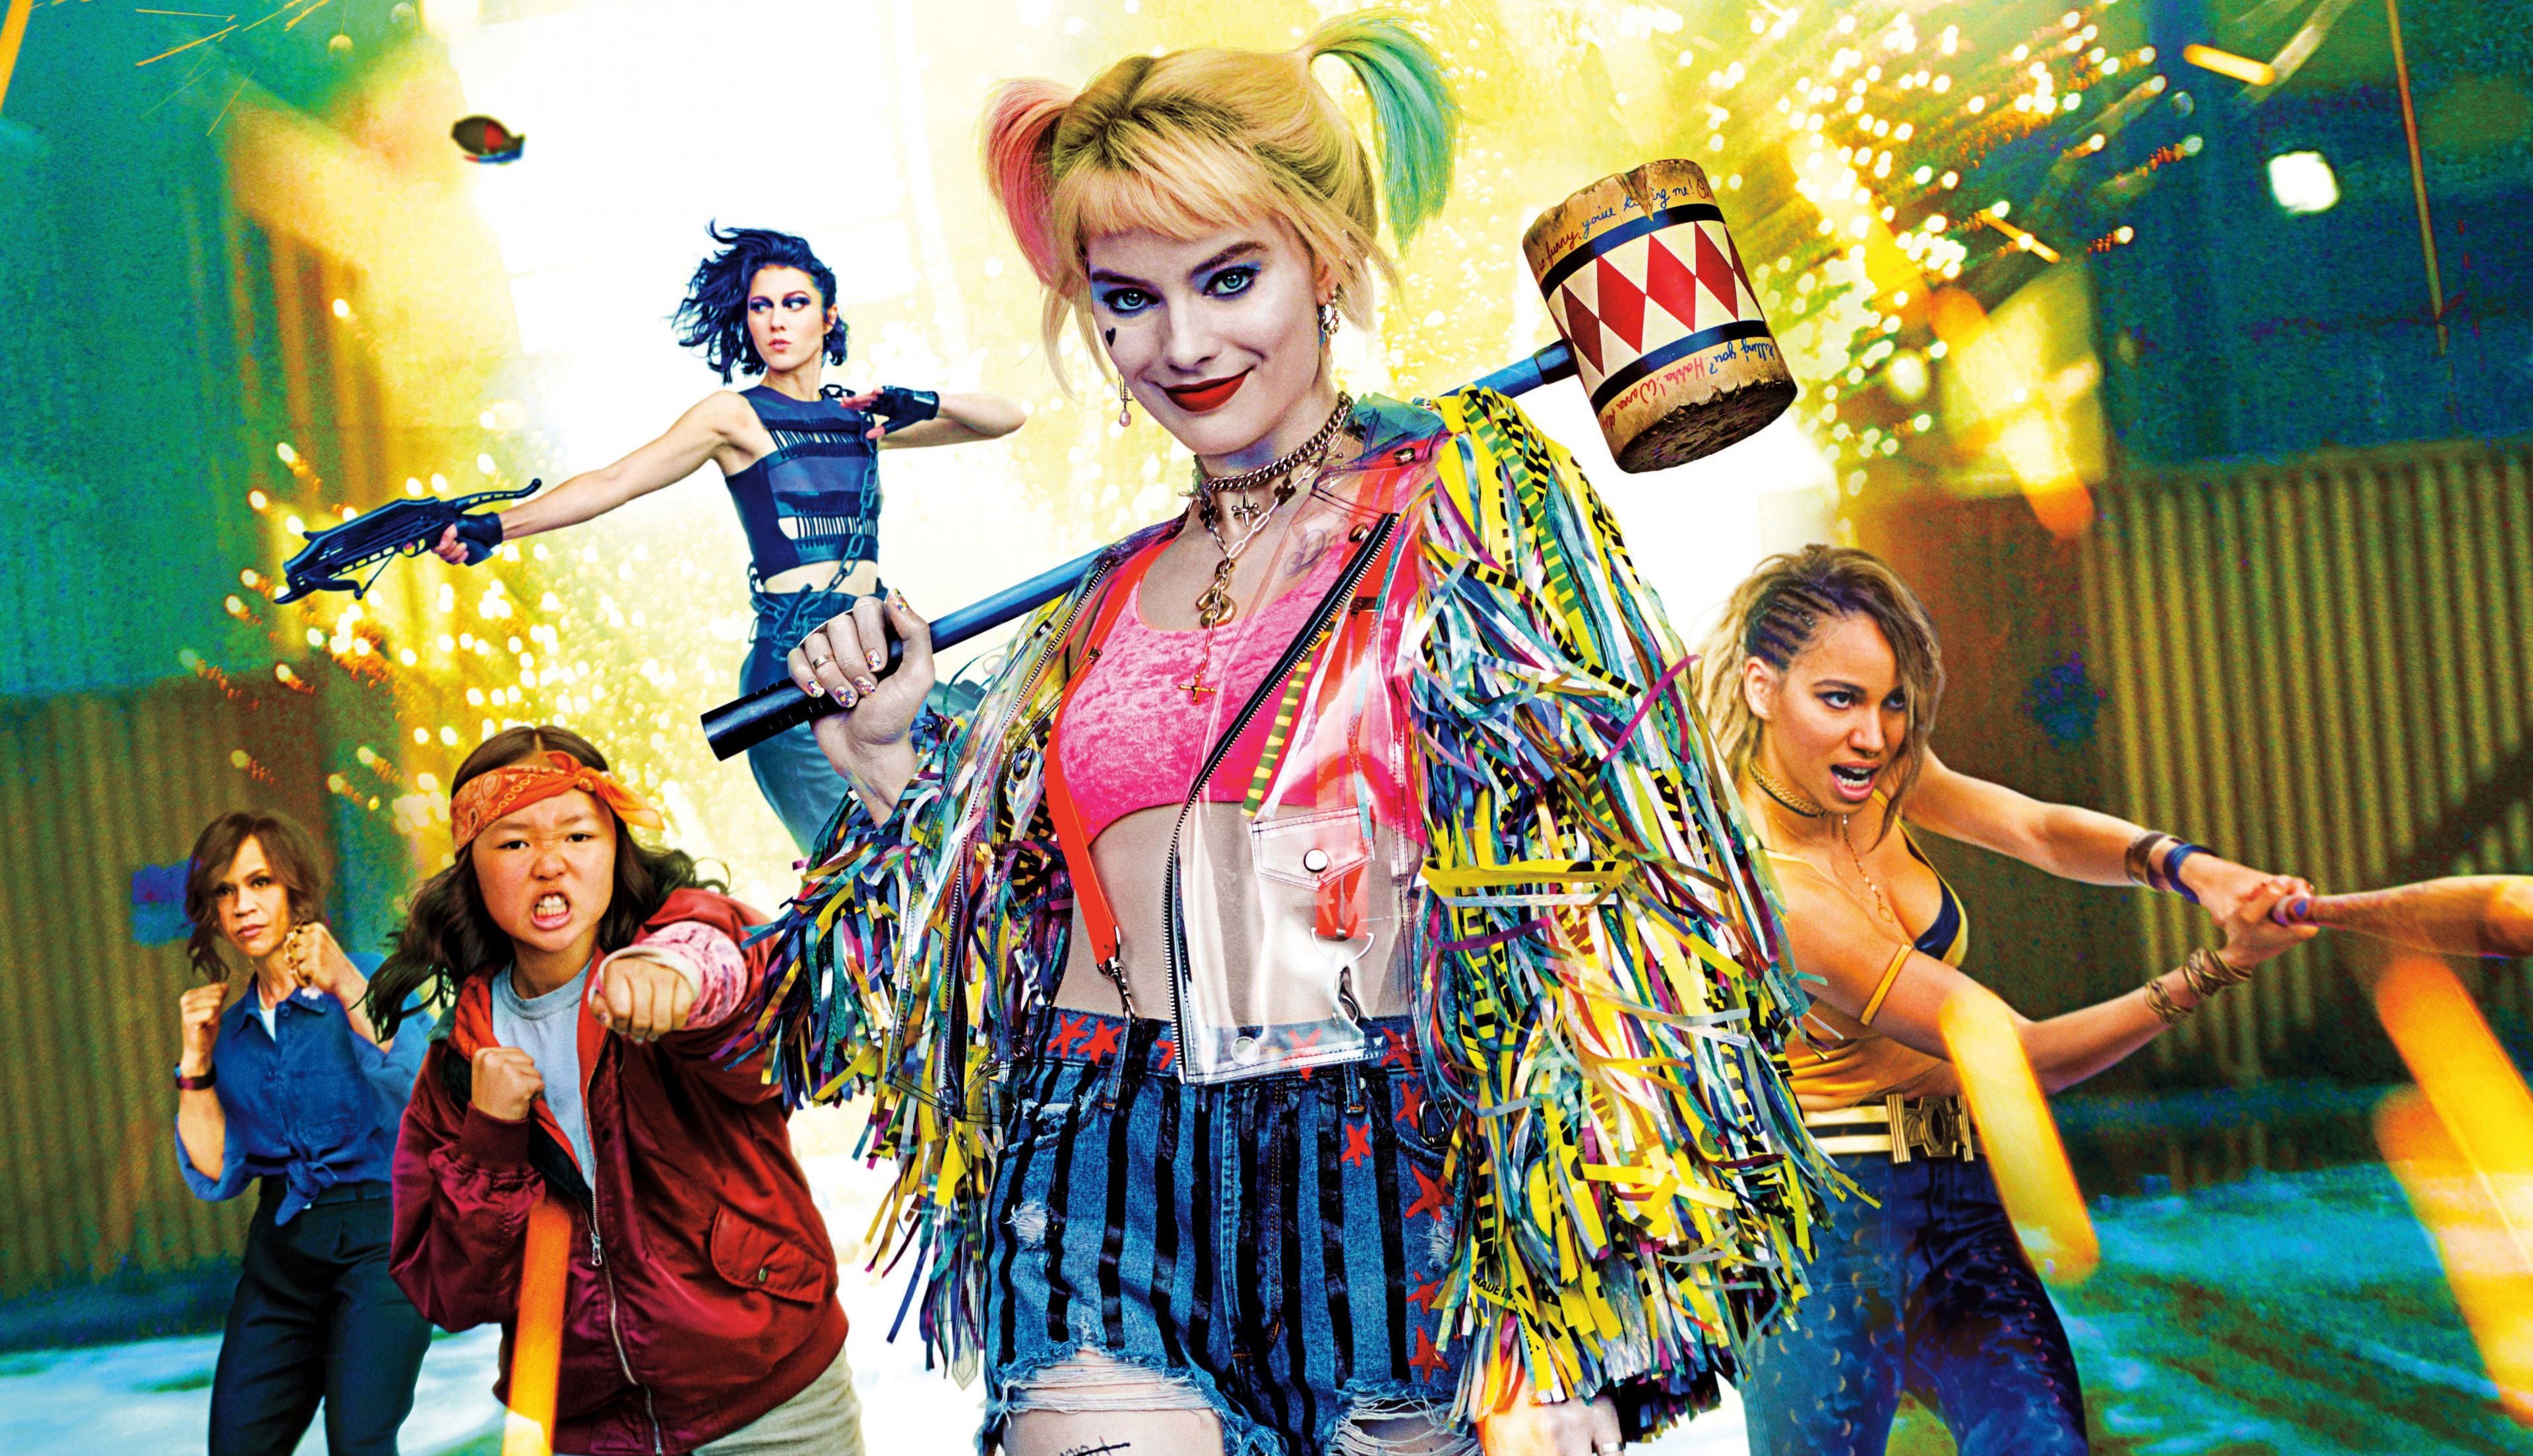 Birds of Prey DVD, Blu-Ray, Digital Release Date Will the Harley Quinn Movie Available on Netflix or Amazon